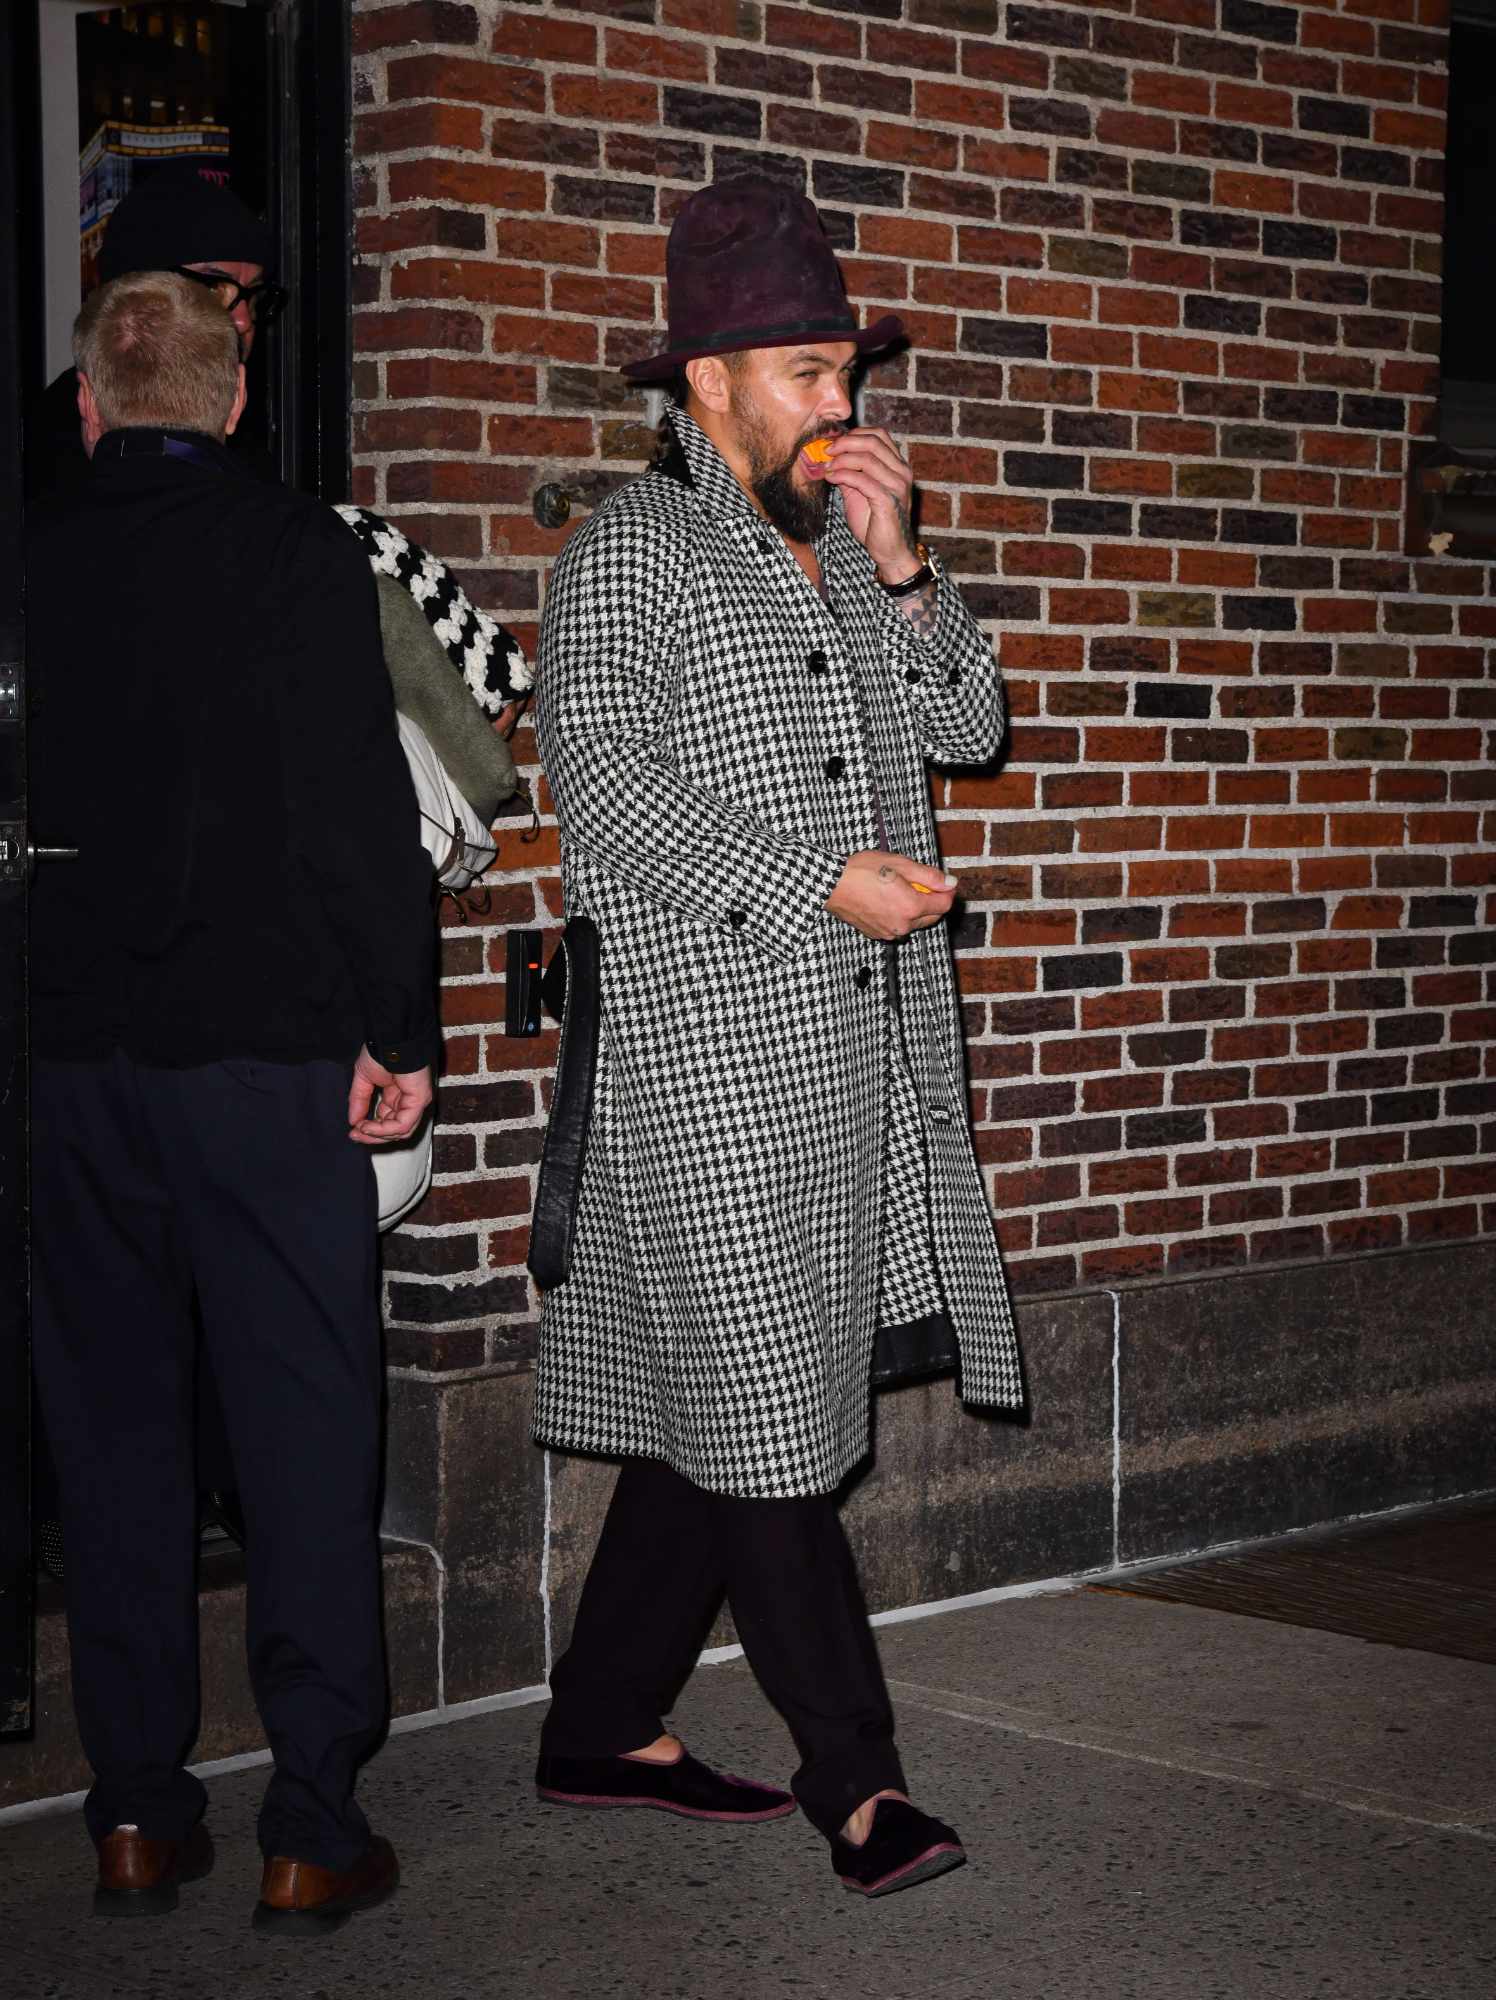 Jason Momoa wears a tall hat, houndstooth coat & slippers while eating Cheez-Its at The Late Show studios